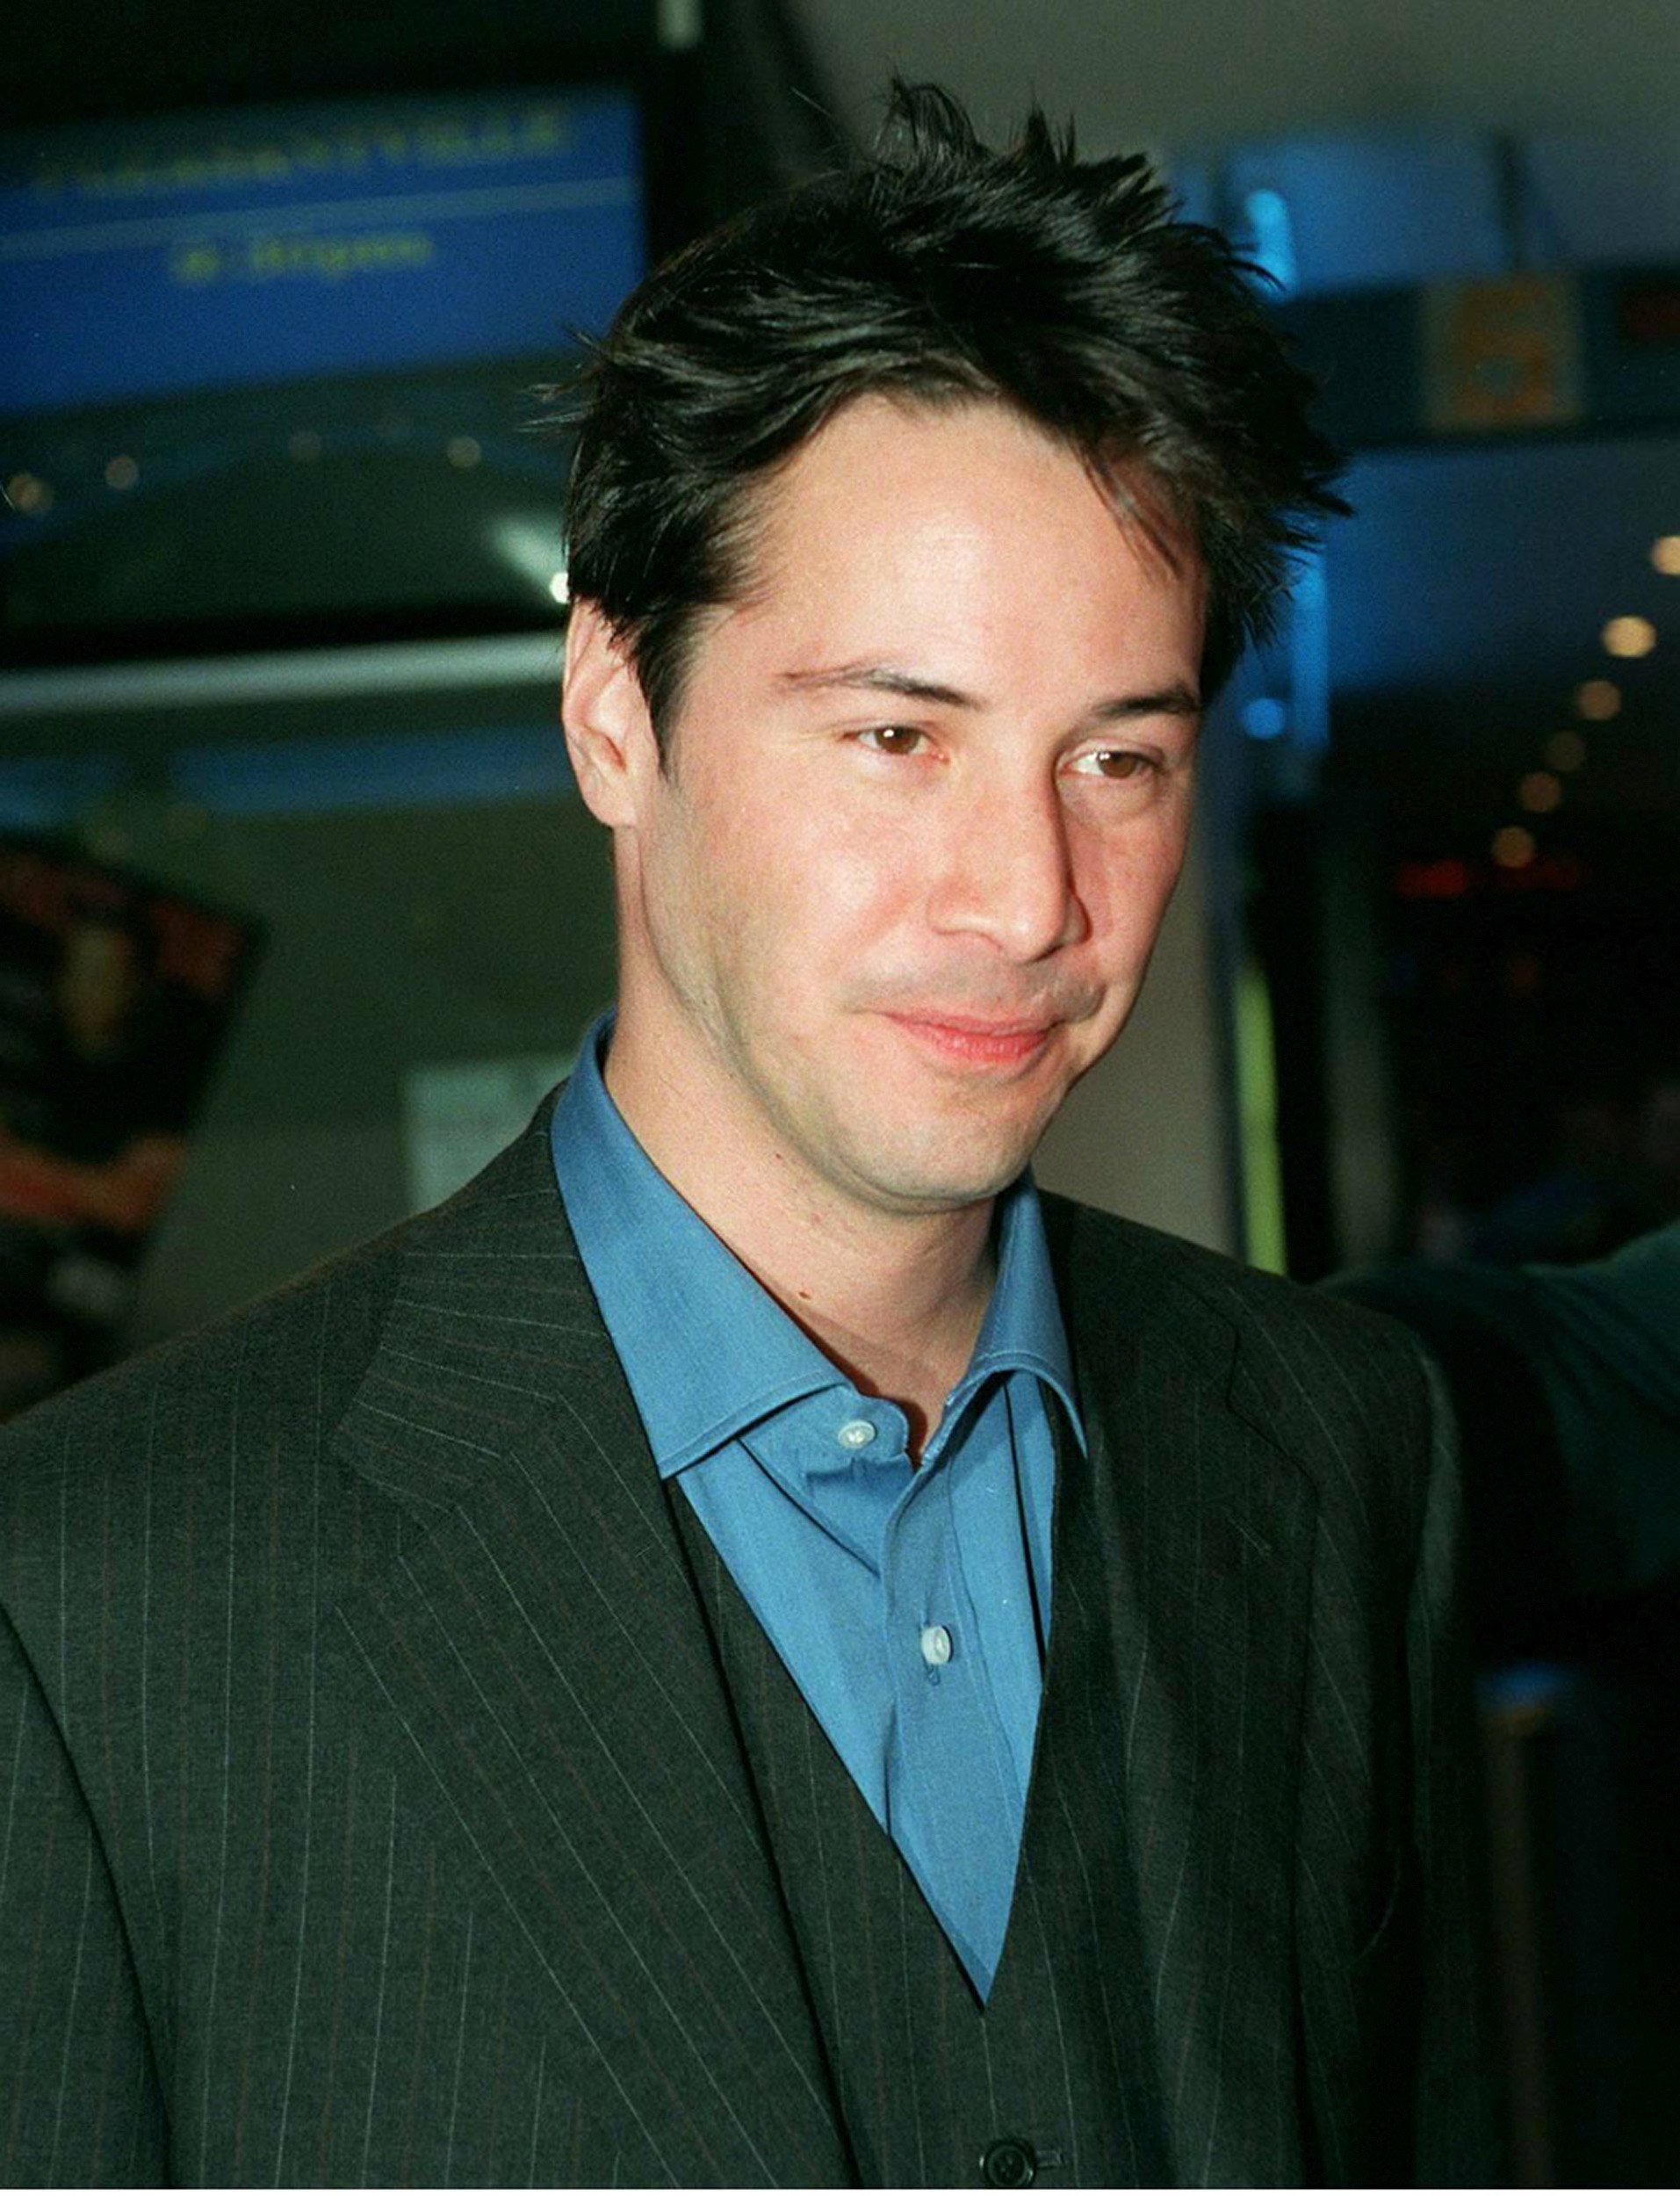  Keanu Reeves attends the Australian Premiere of The Matrix in Sydney, Australia, in April 1999. | Source: Getty Images.